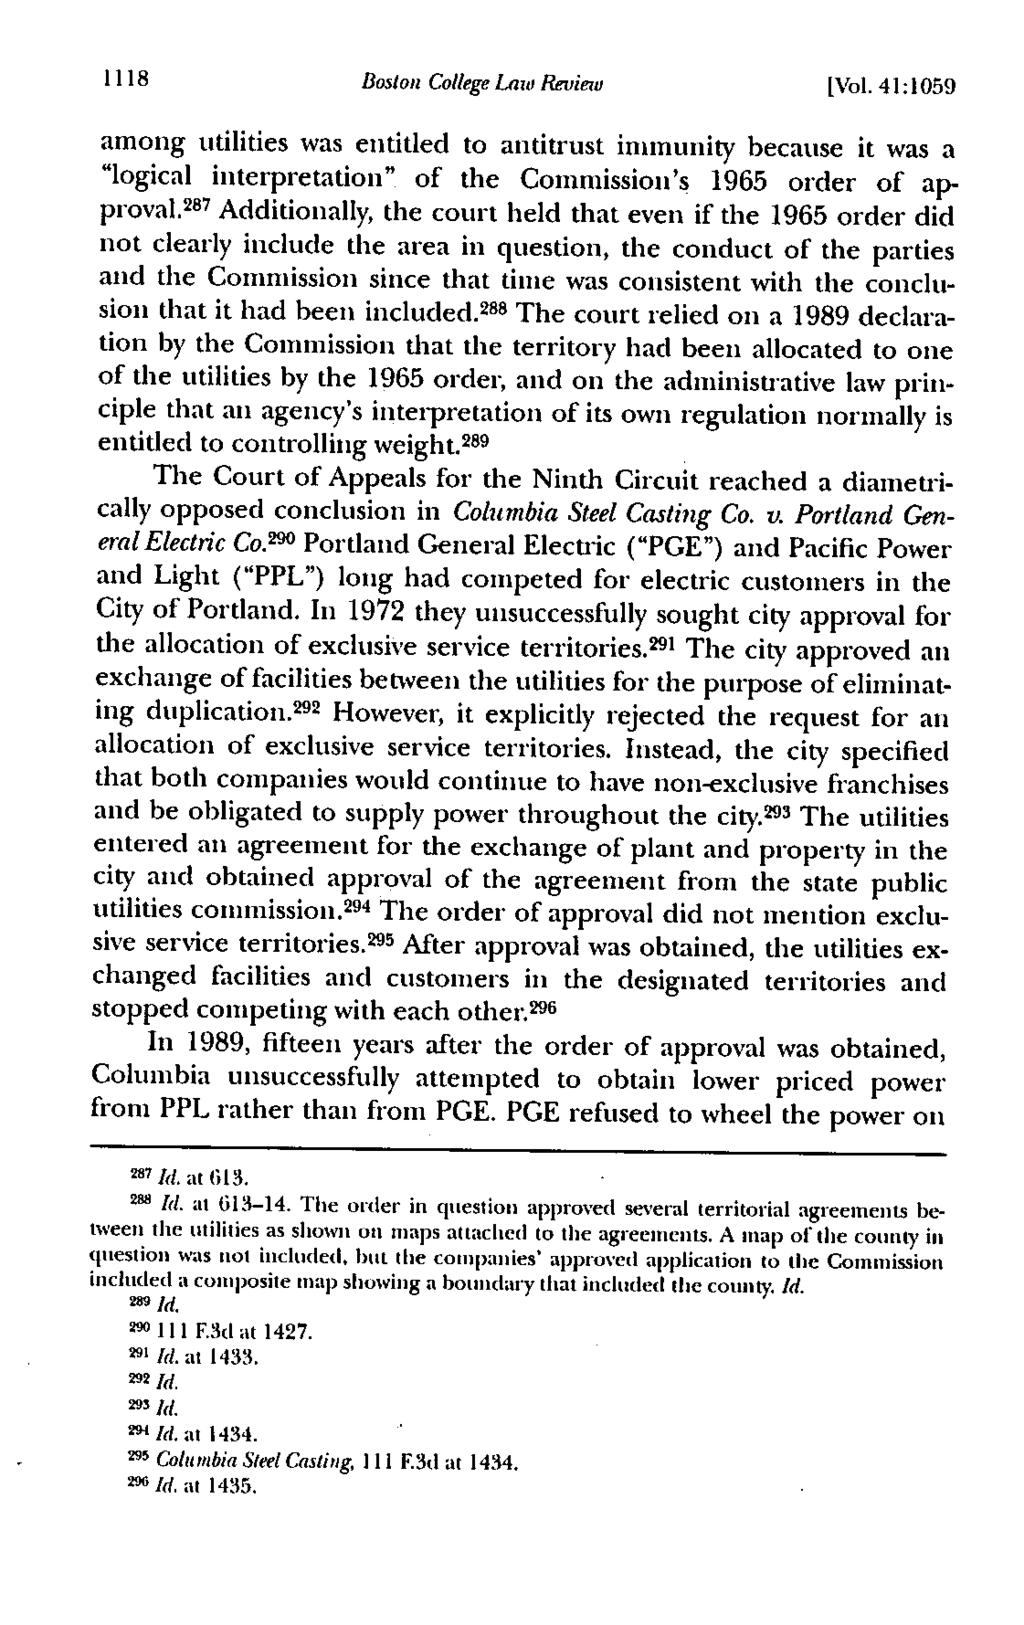 1118 Boston College Law Review [Vol. 41:1059 among utilities was entitled to antitrust immunity because it was a "logical interpretation". of the Commission's 1965 order of approval.